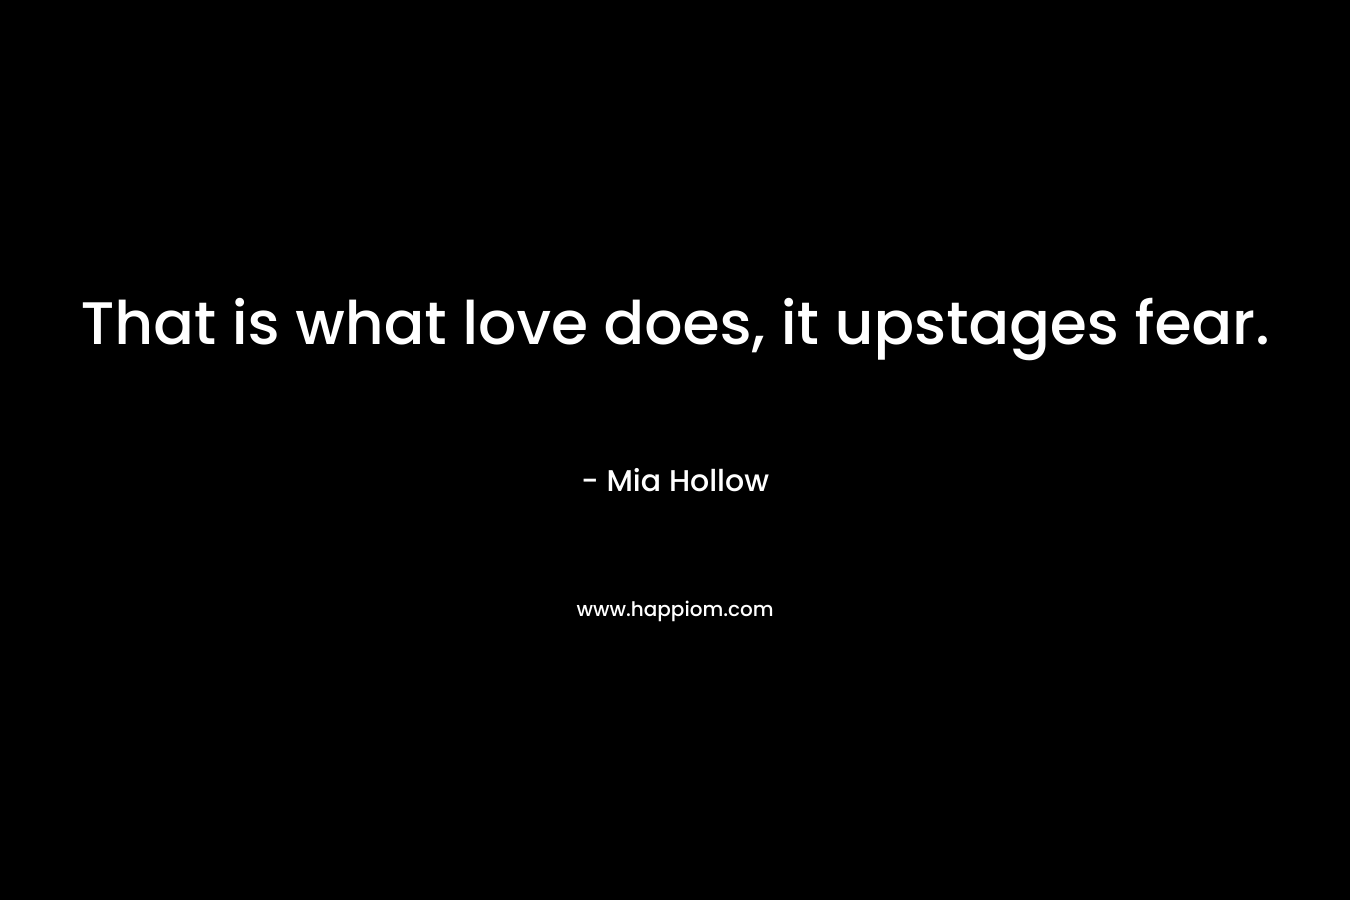 That is what love does, it upstages fear.